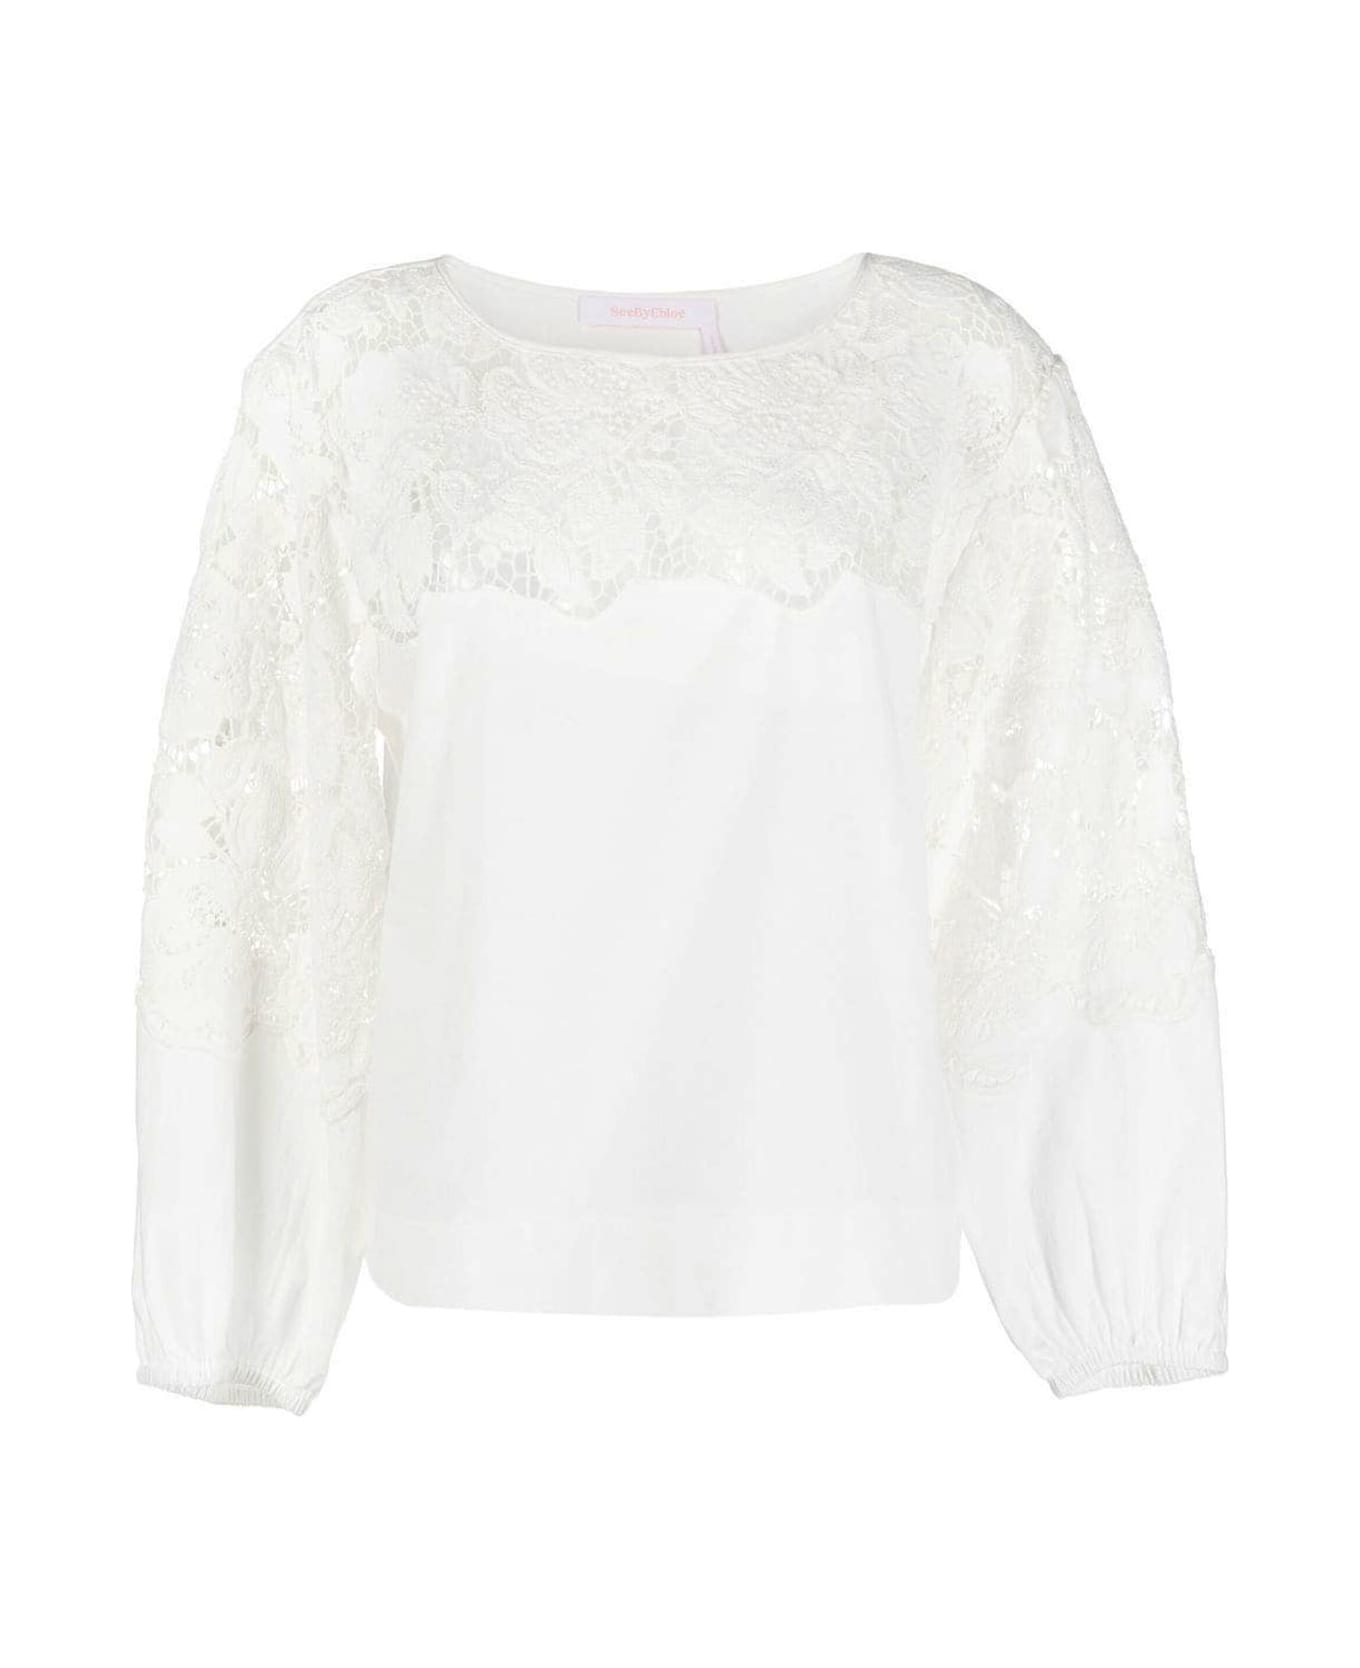 See by Chloé Top - CLOUDY WHITE